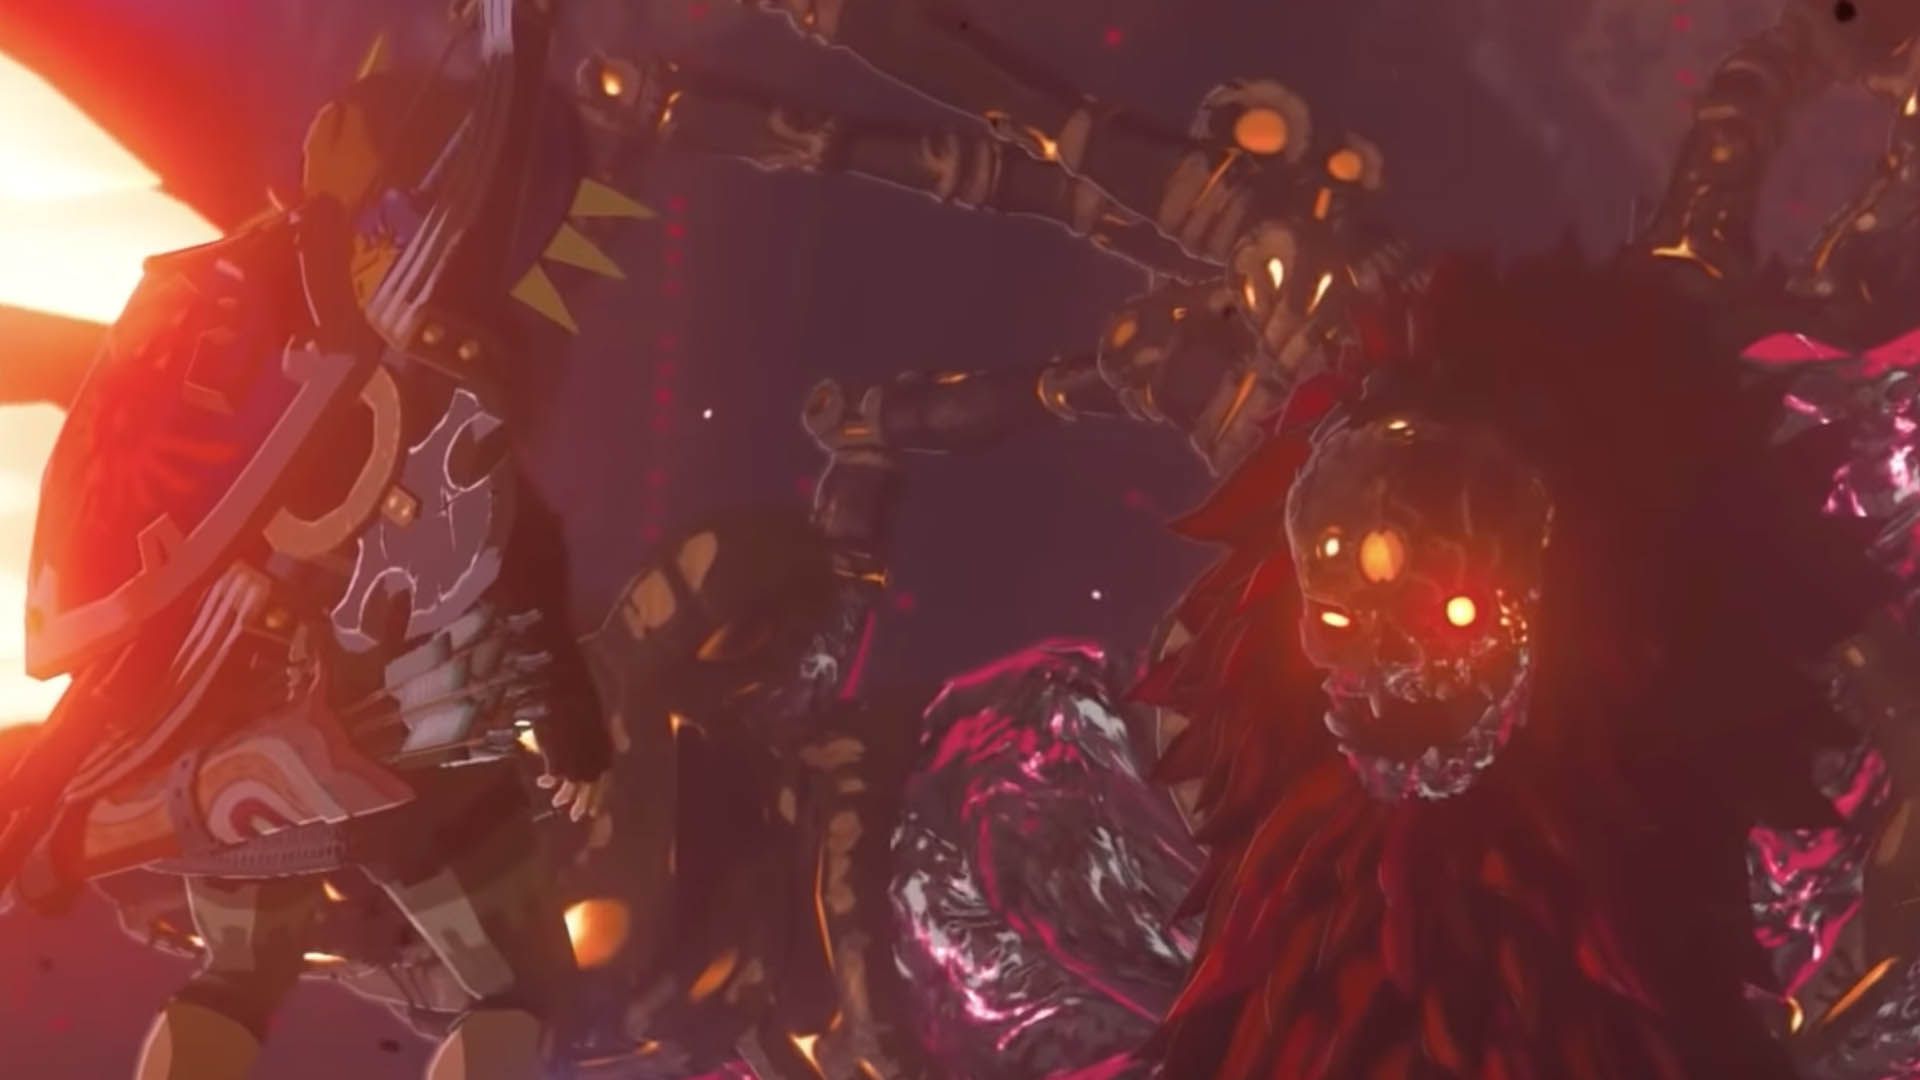 Player takes out Calamity Ganon in one shot in Breath of the Wild